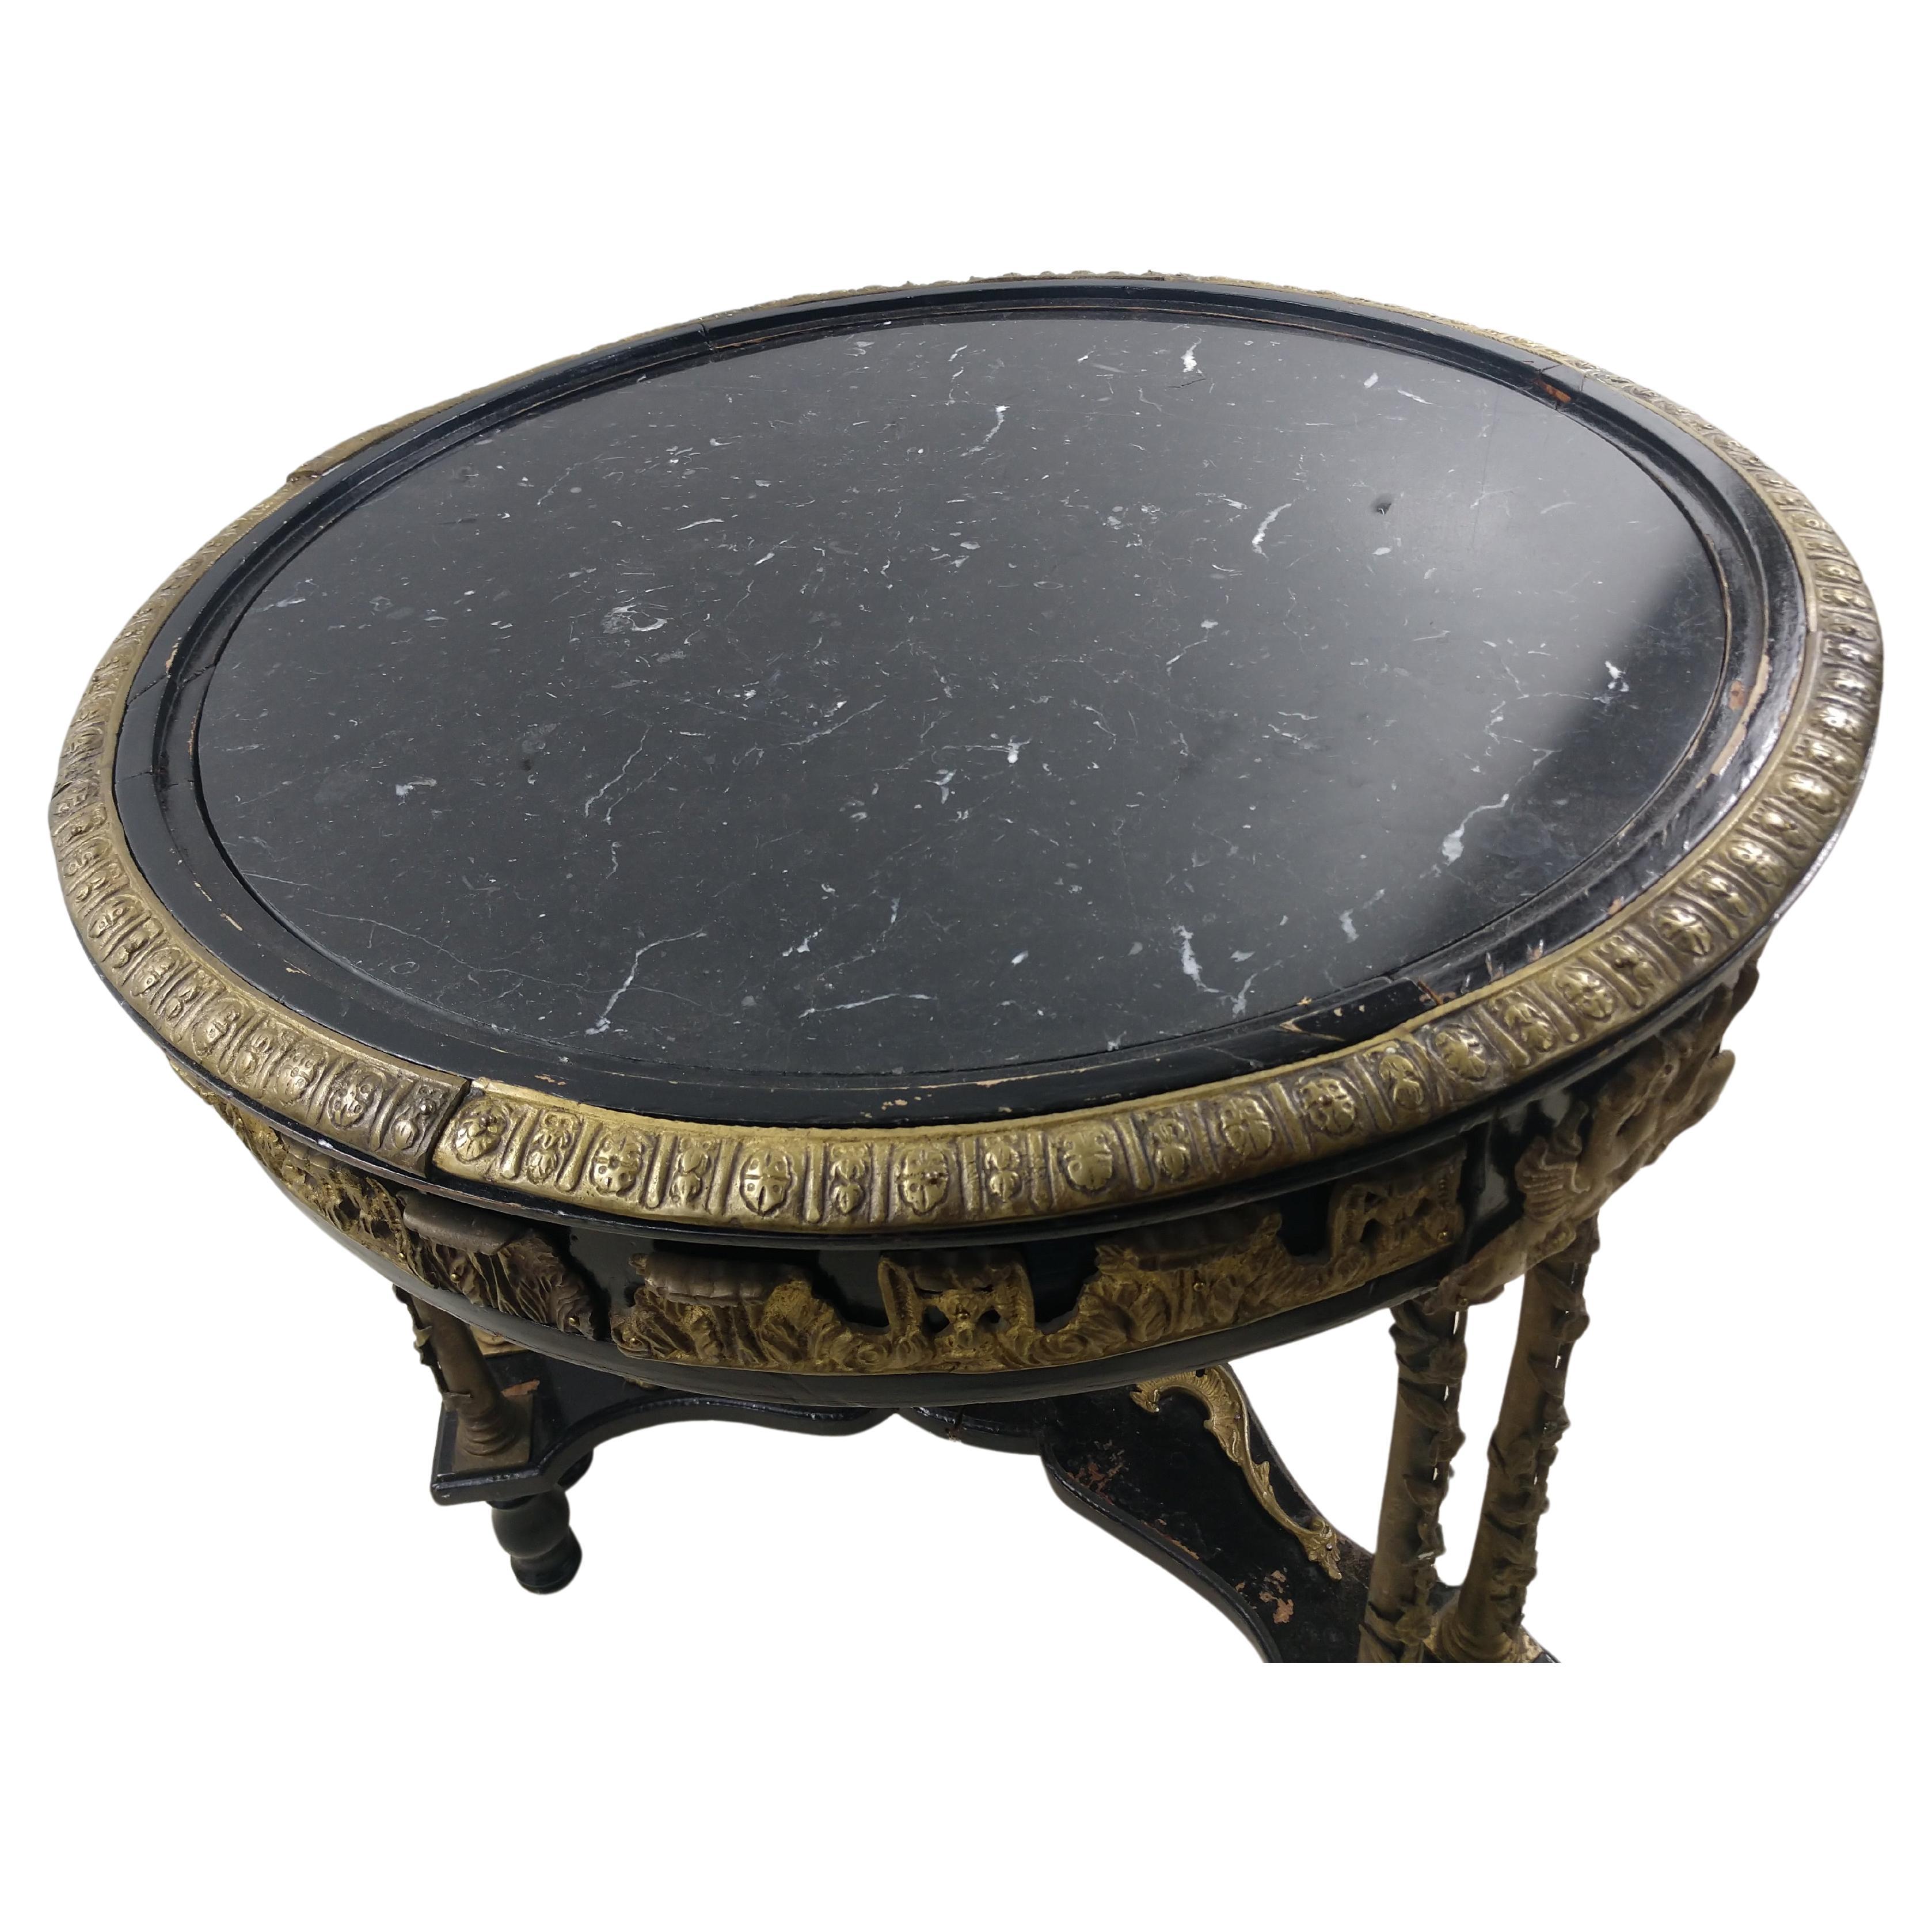 Fabulous black marble top table and covered with beautiful cast bronze adornments. Marble is set into the top, and mounted with a bronze edge. One bronze adornments missing from a leg stretcher. Pictured. Otherwise in excellent vintage condition